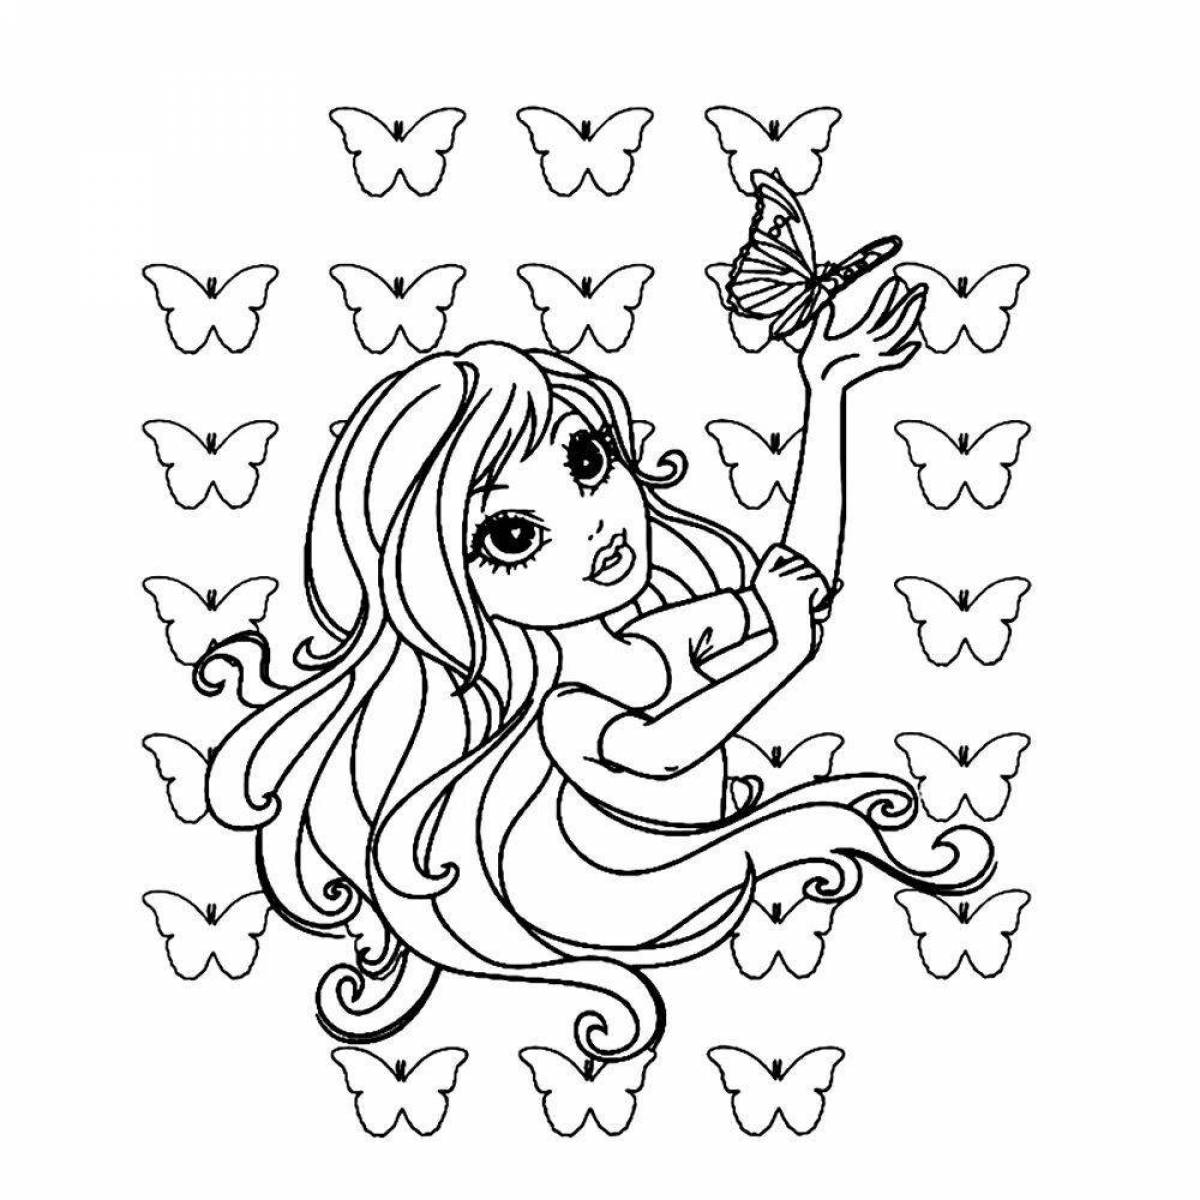 Luminous coloring pages 8-9 years old for girls